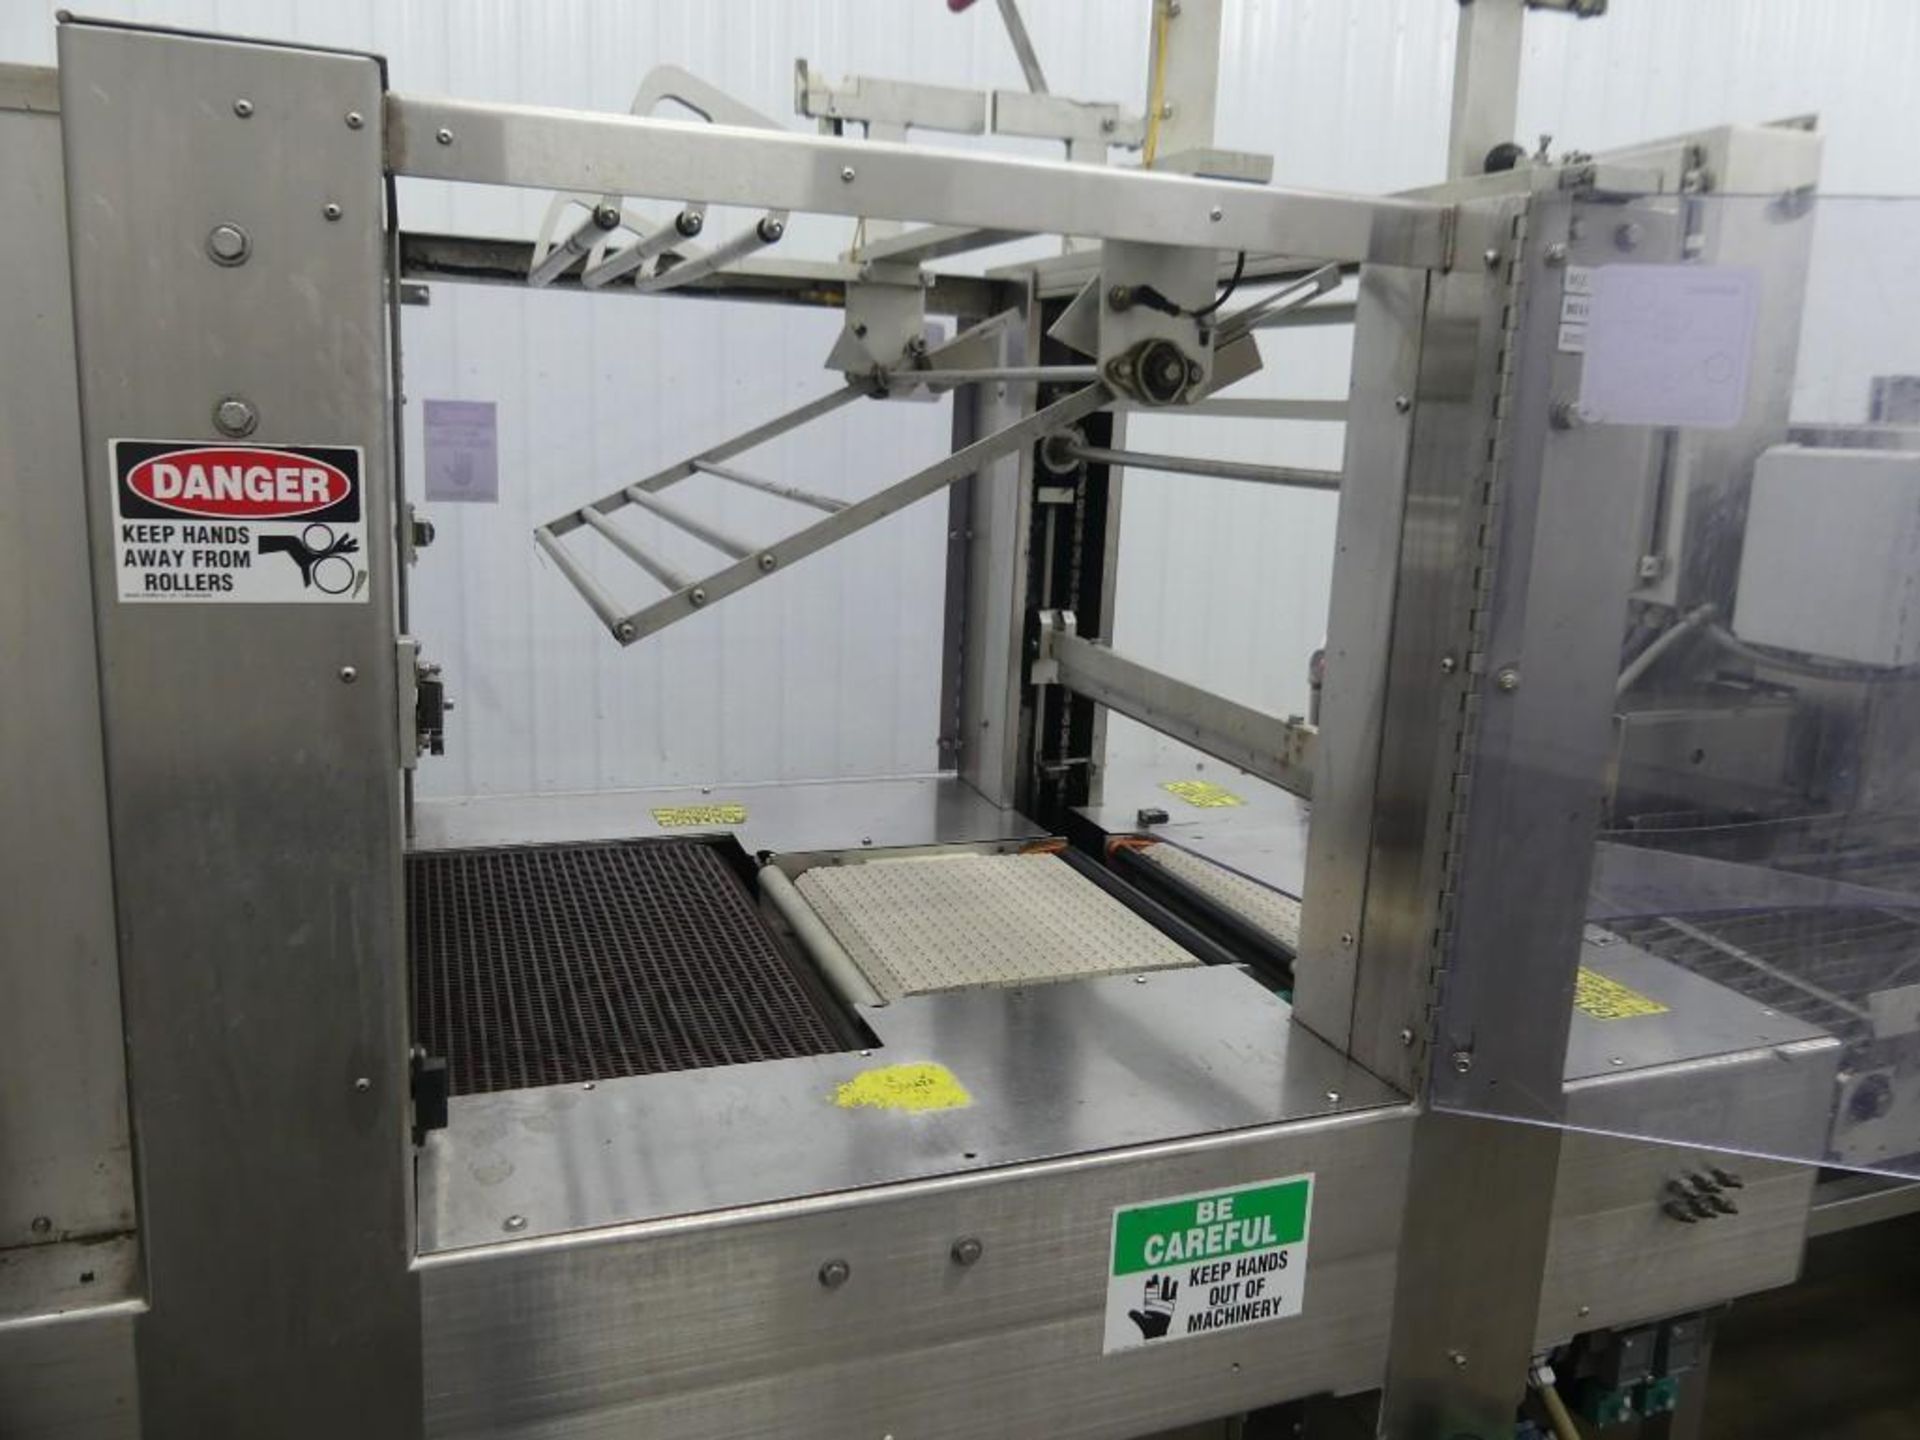 Arpac Delkor Spot-Pak 112-SS-24 Automatic Stainless Steel Shrink Bundler - Image 40 of 101